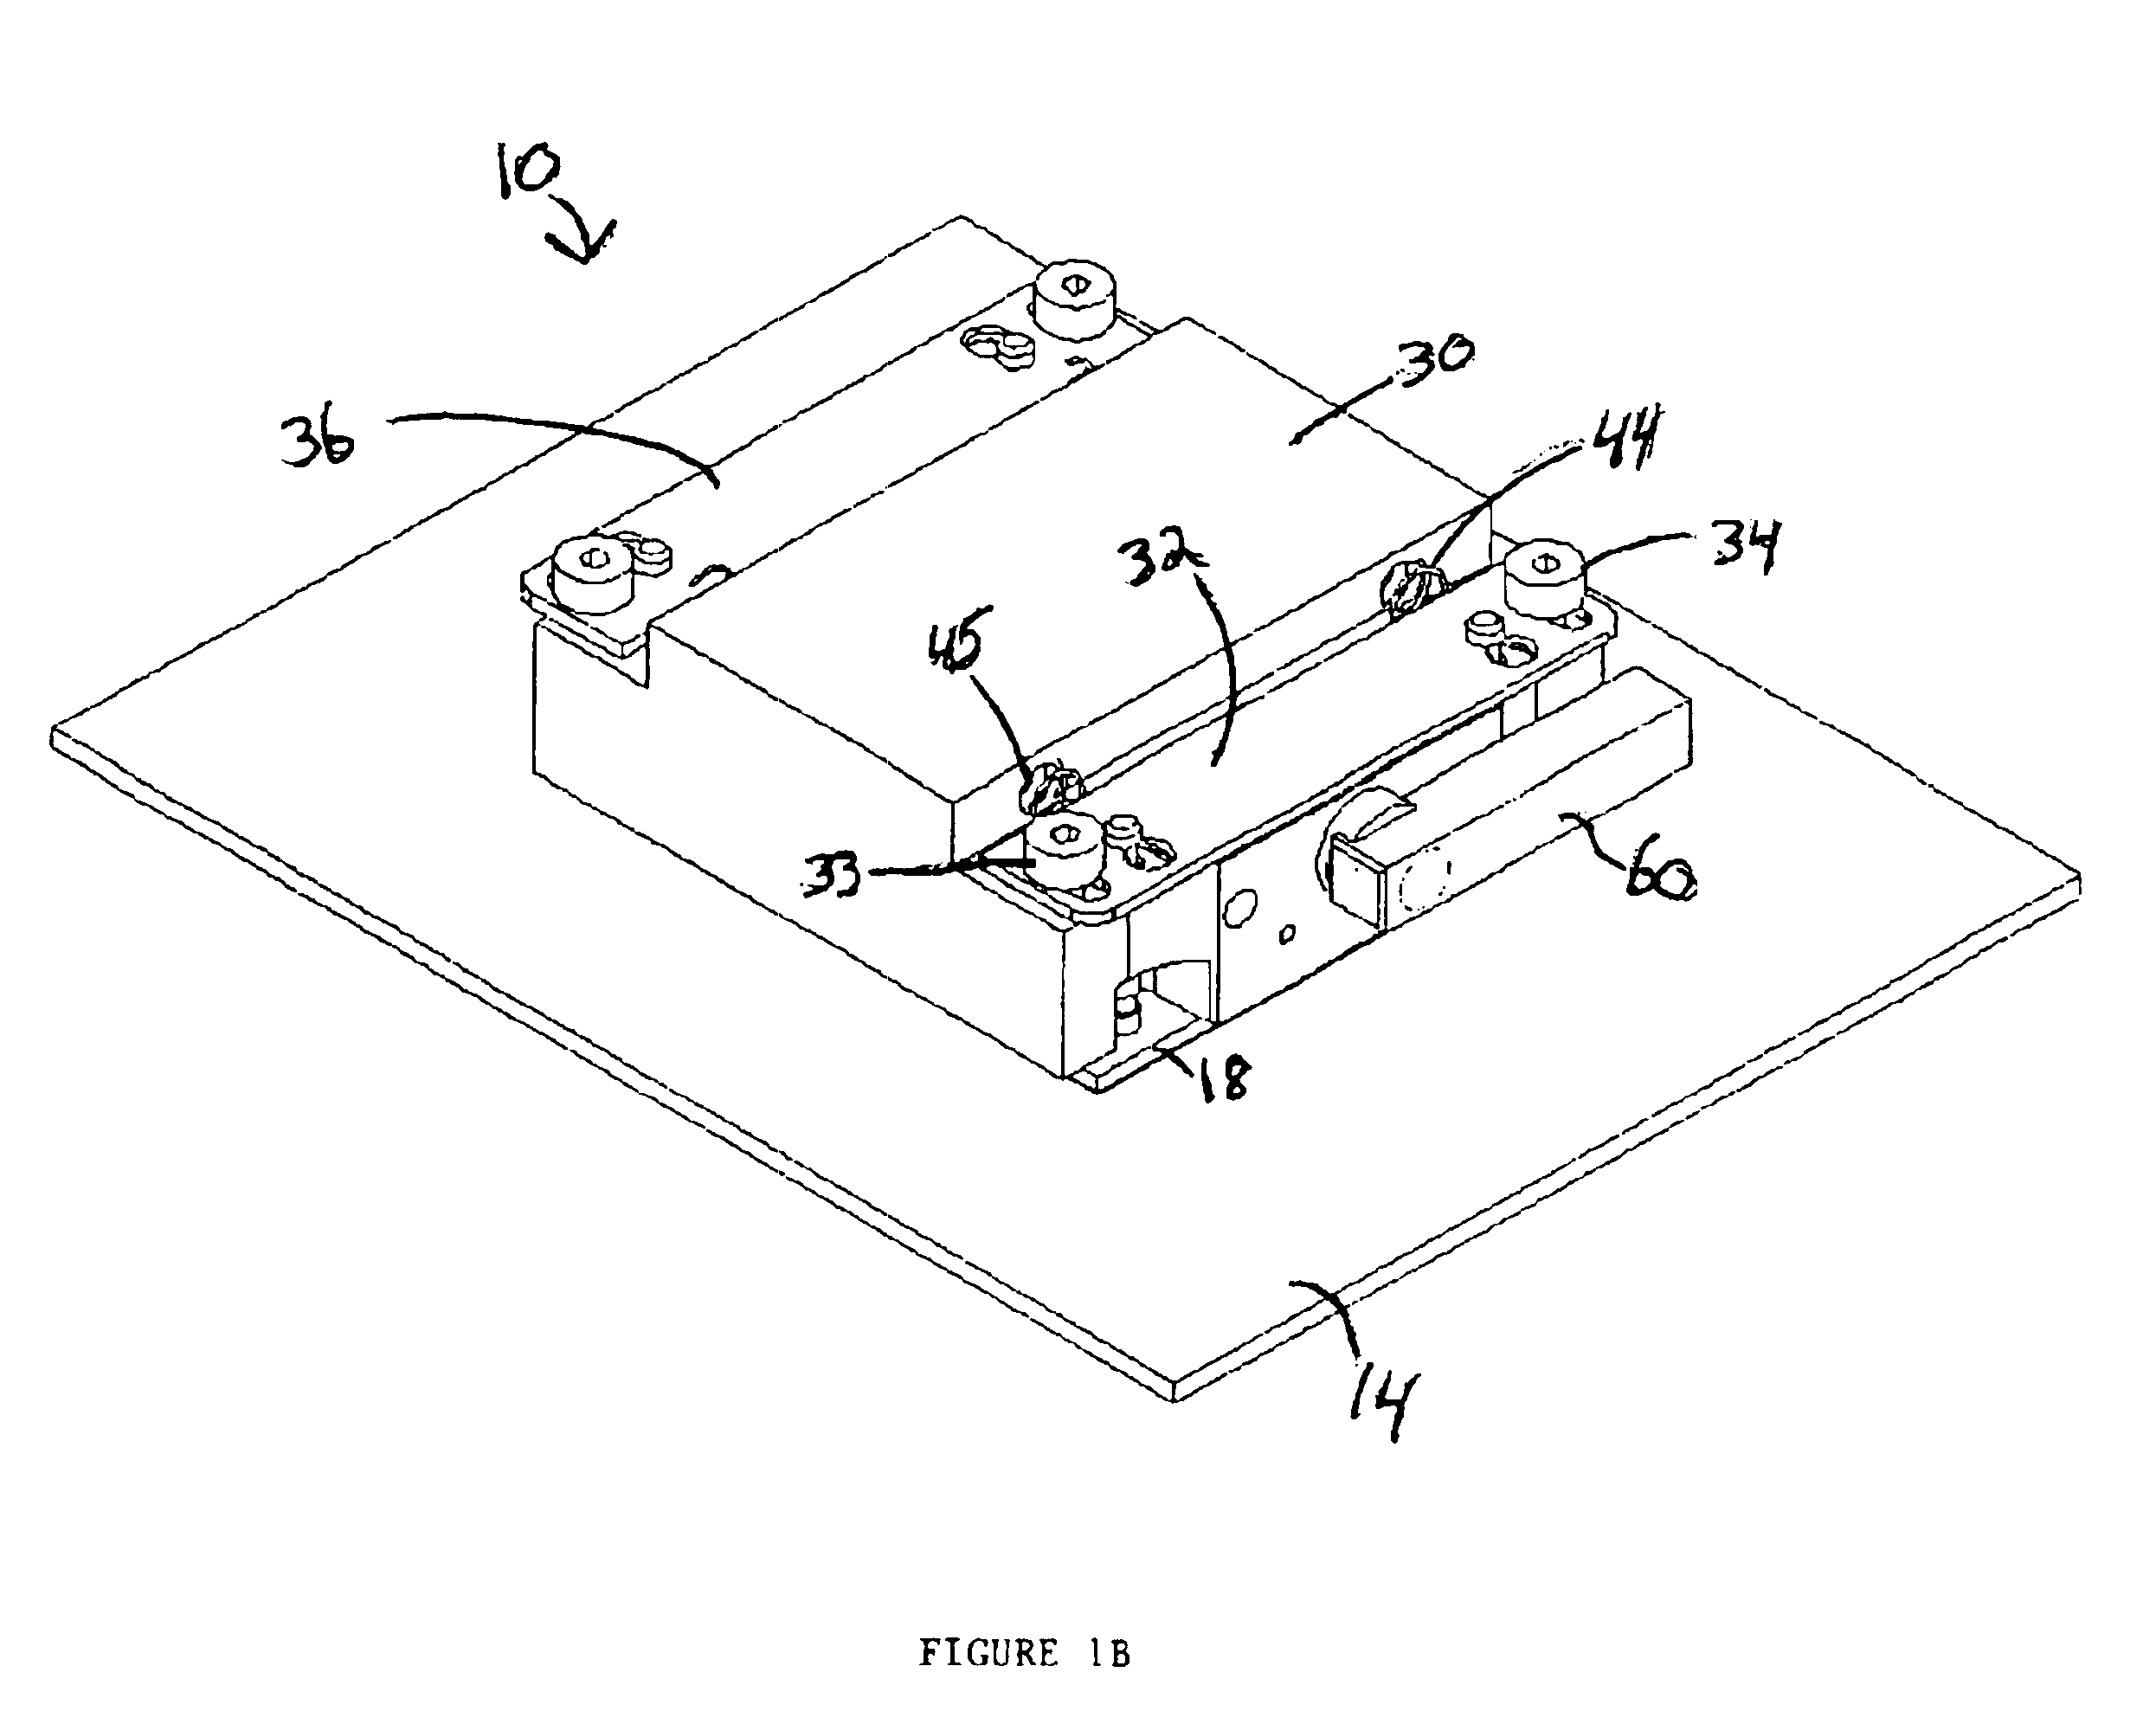 Apparatus for applying a mechanically-releasable balanced compressive load to an assembly such as a compliant anisotropic conductive elastomer electrical connector